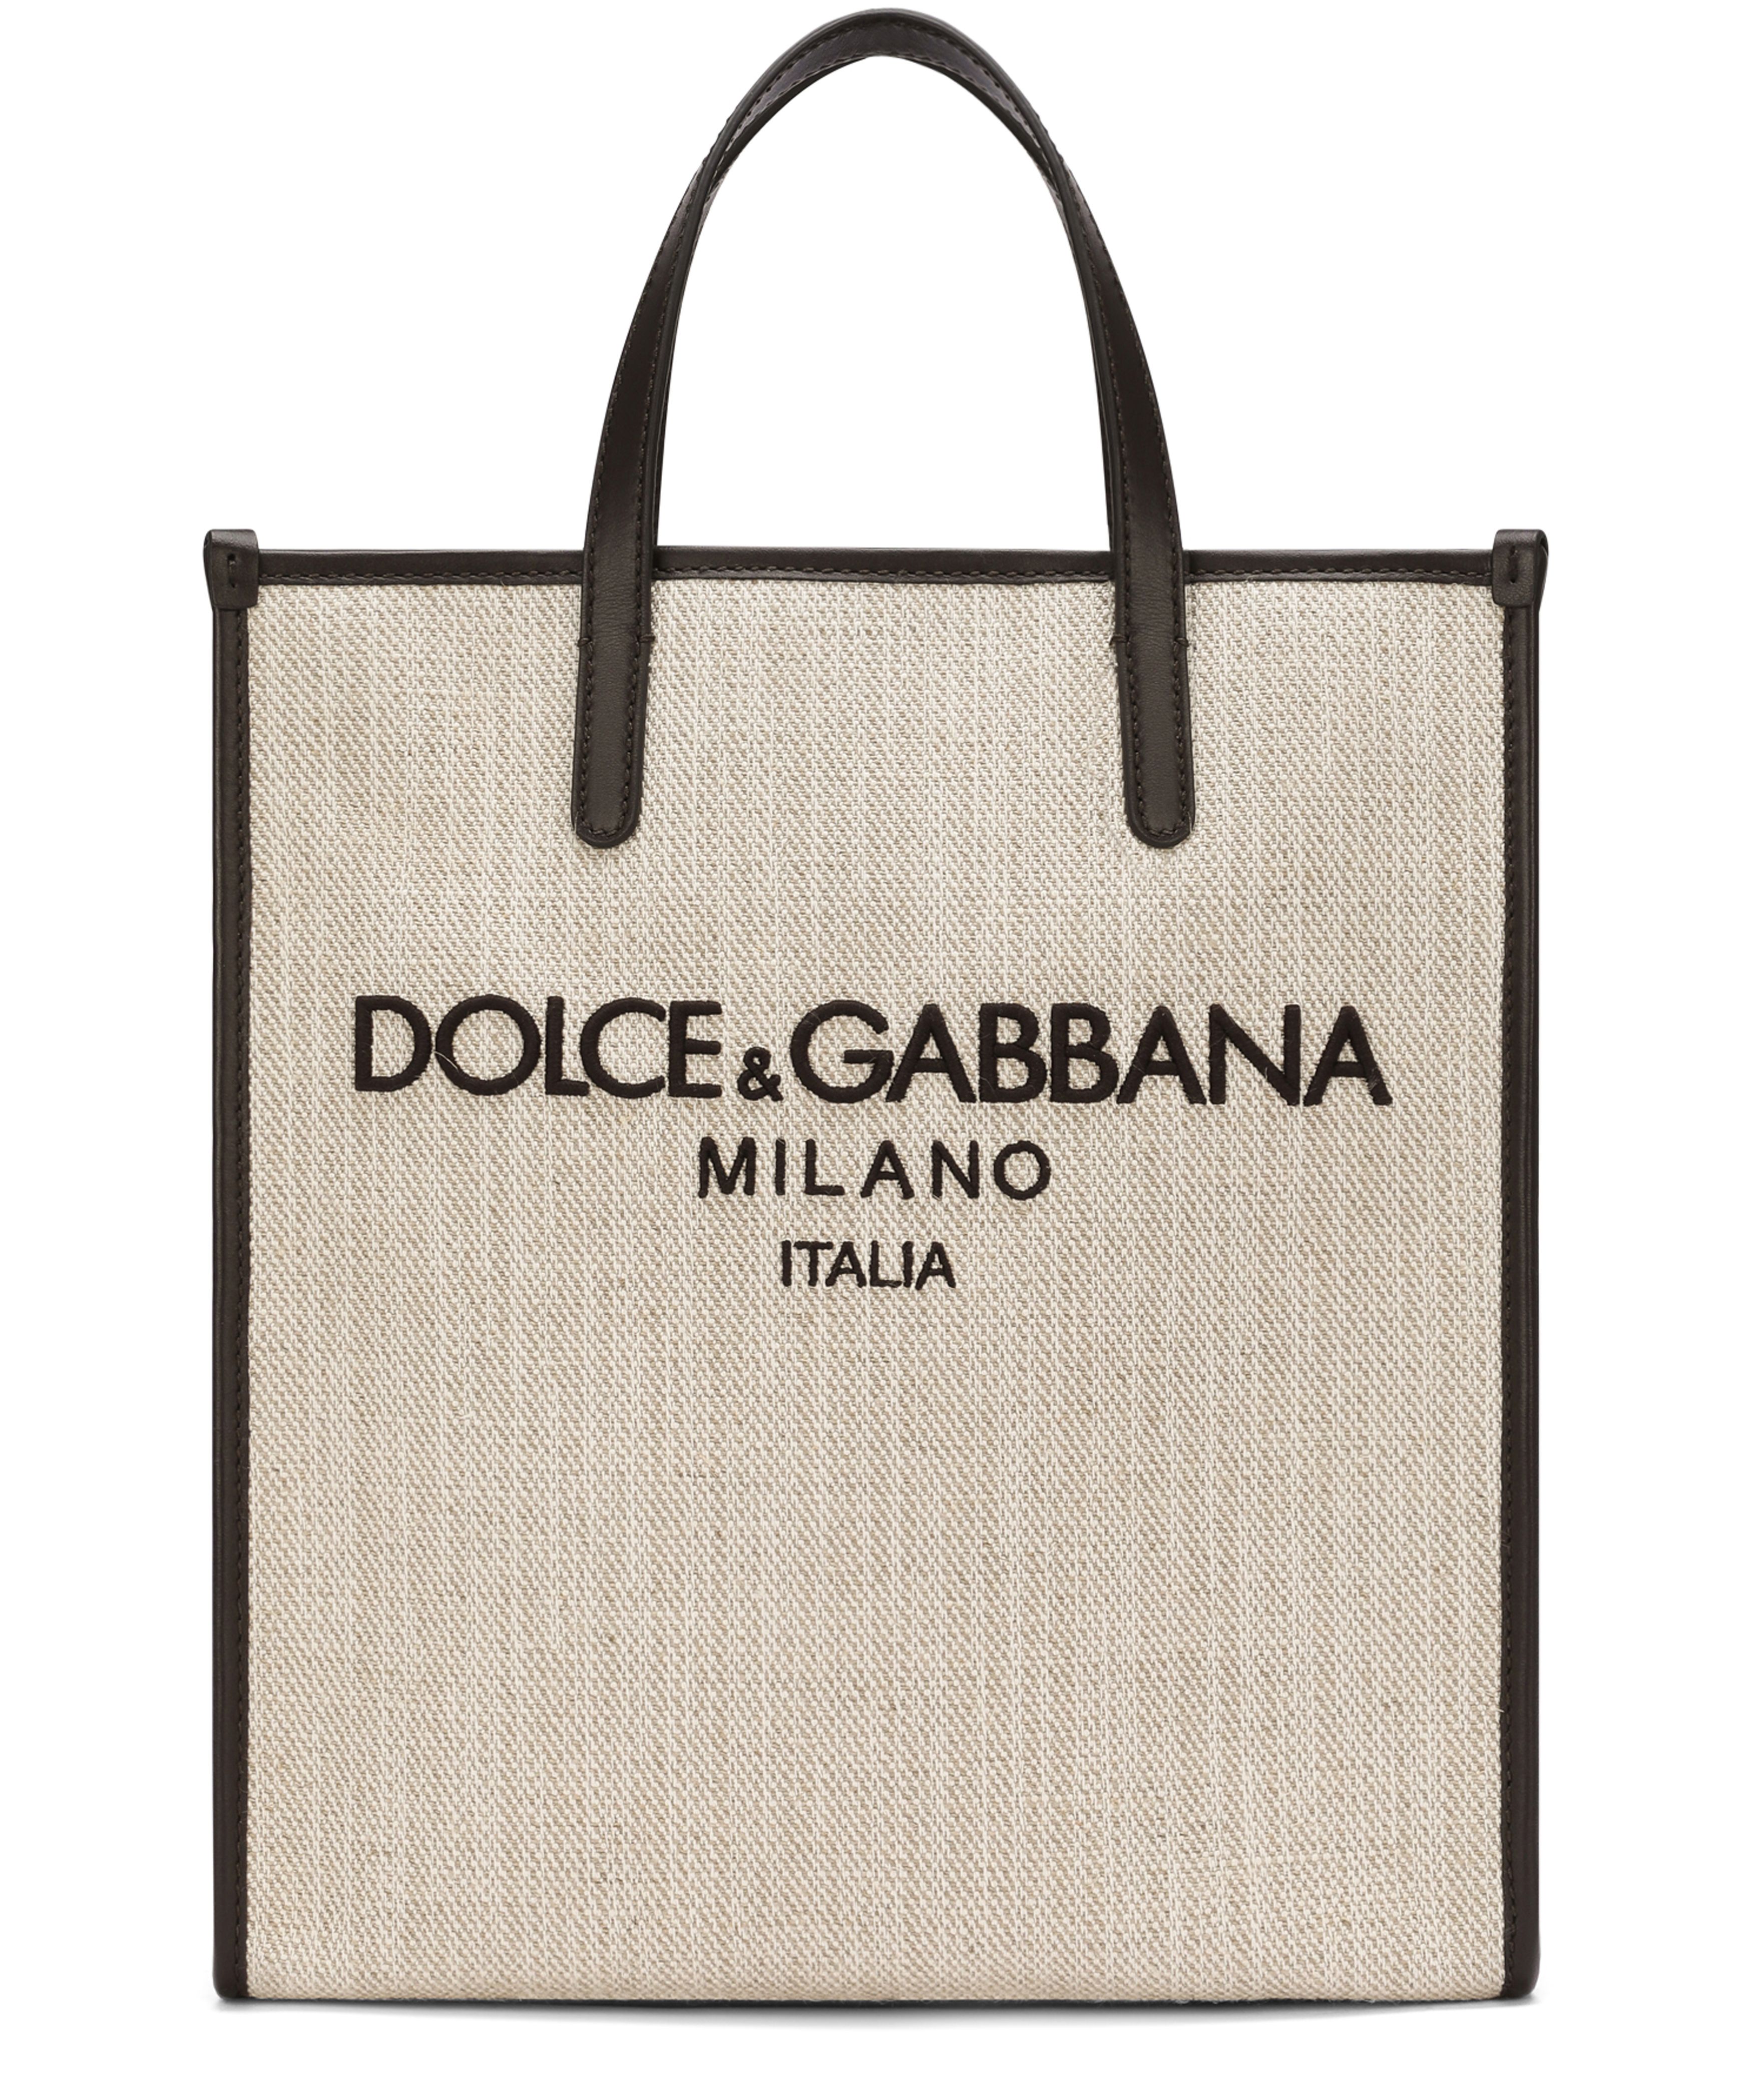 Dolce & Gabbana Small Structured Canvas Tote Bag